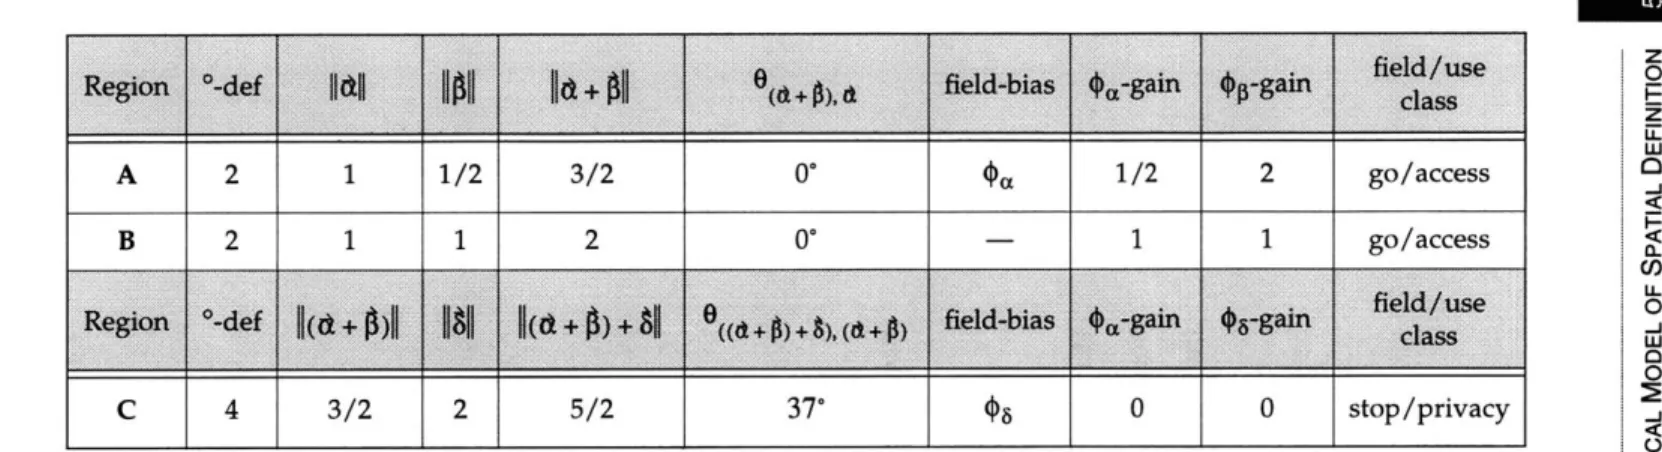 Table  4-4: Conditions for Figure 4-4 and 4-5